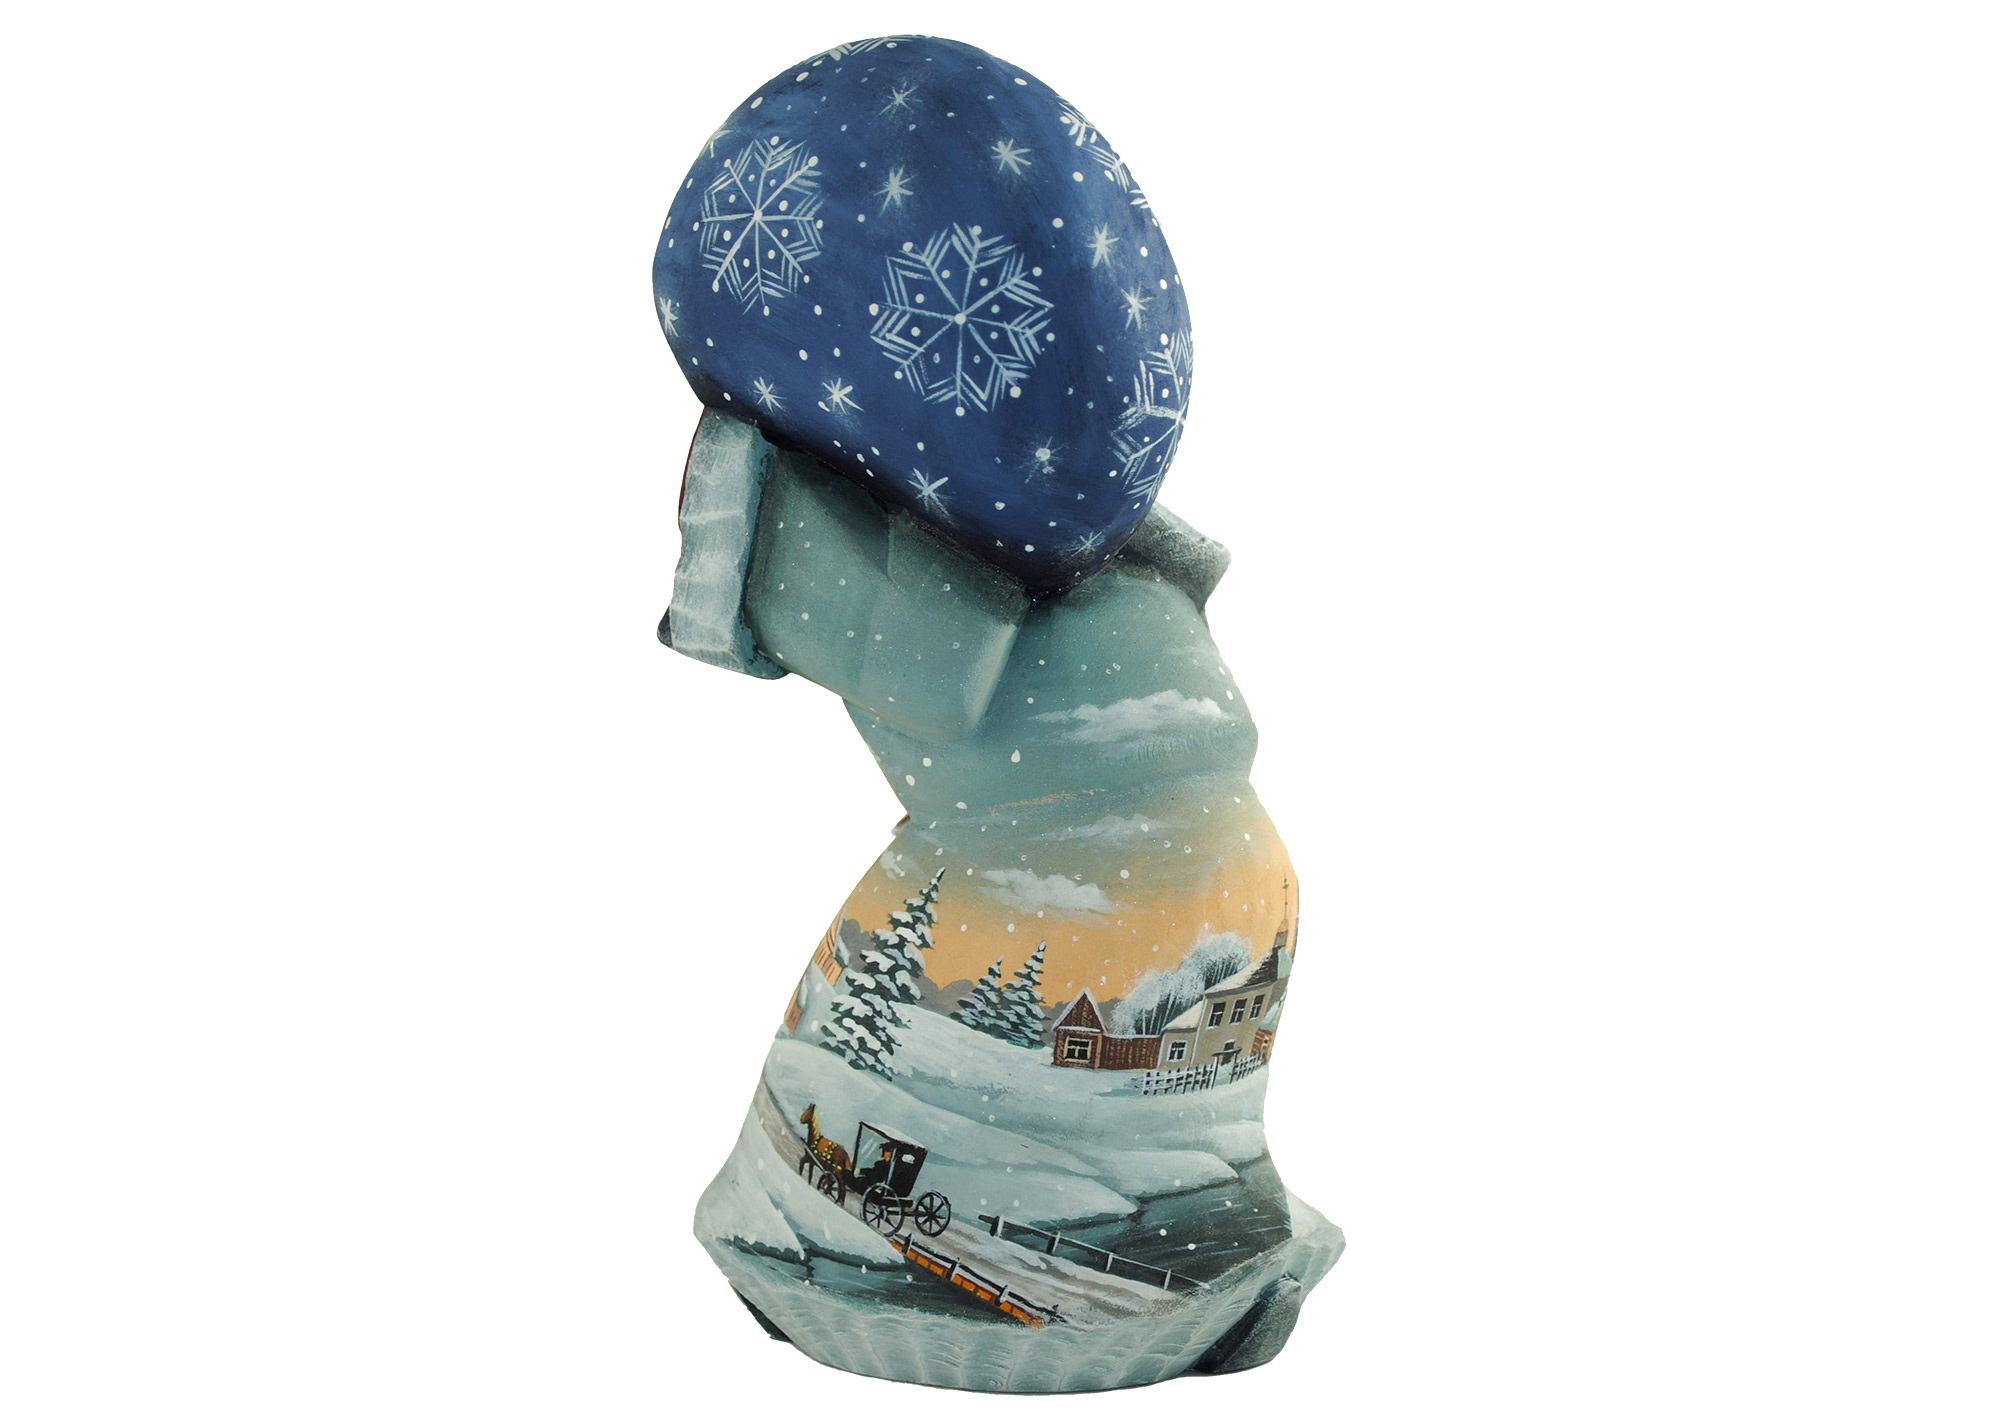 Buy Peaceful Village "Snow Play" Father Frost Carving at GoldenCockerel.com